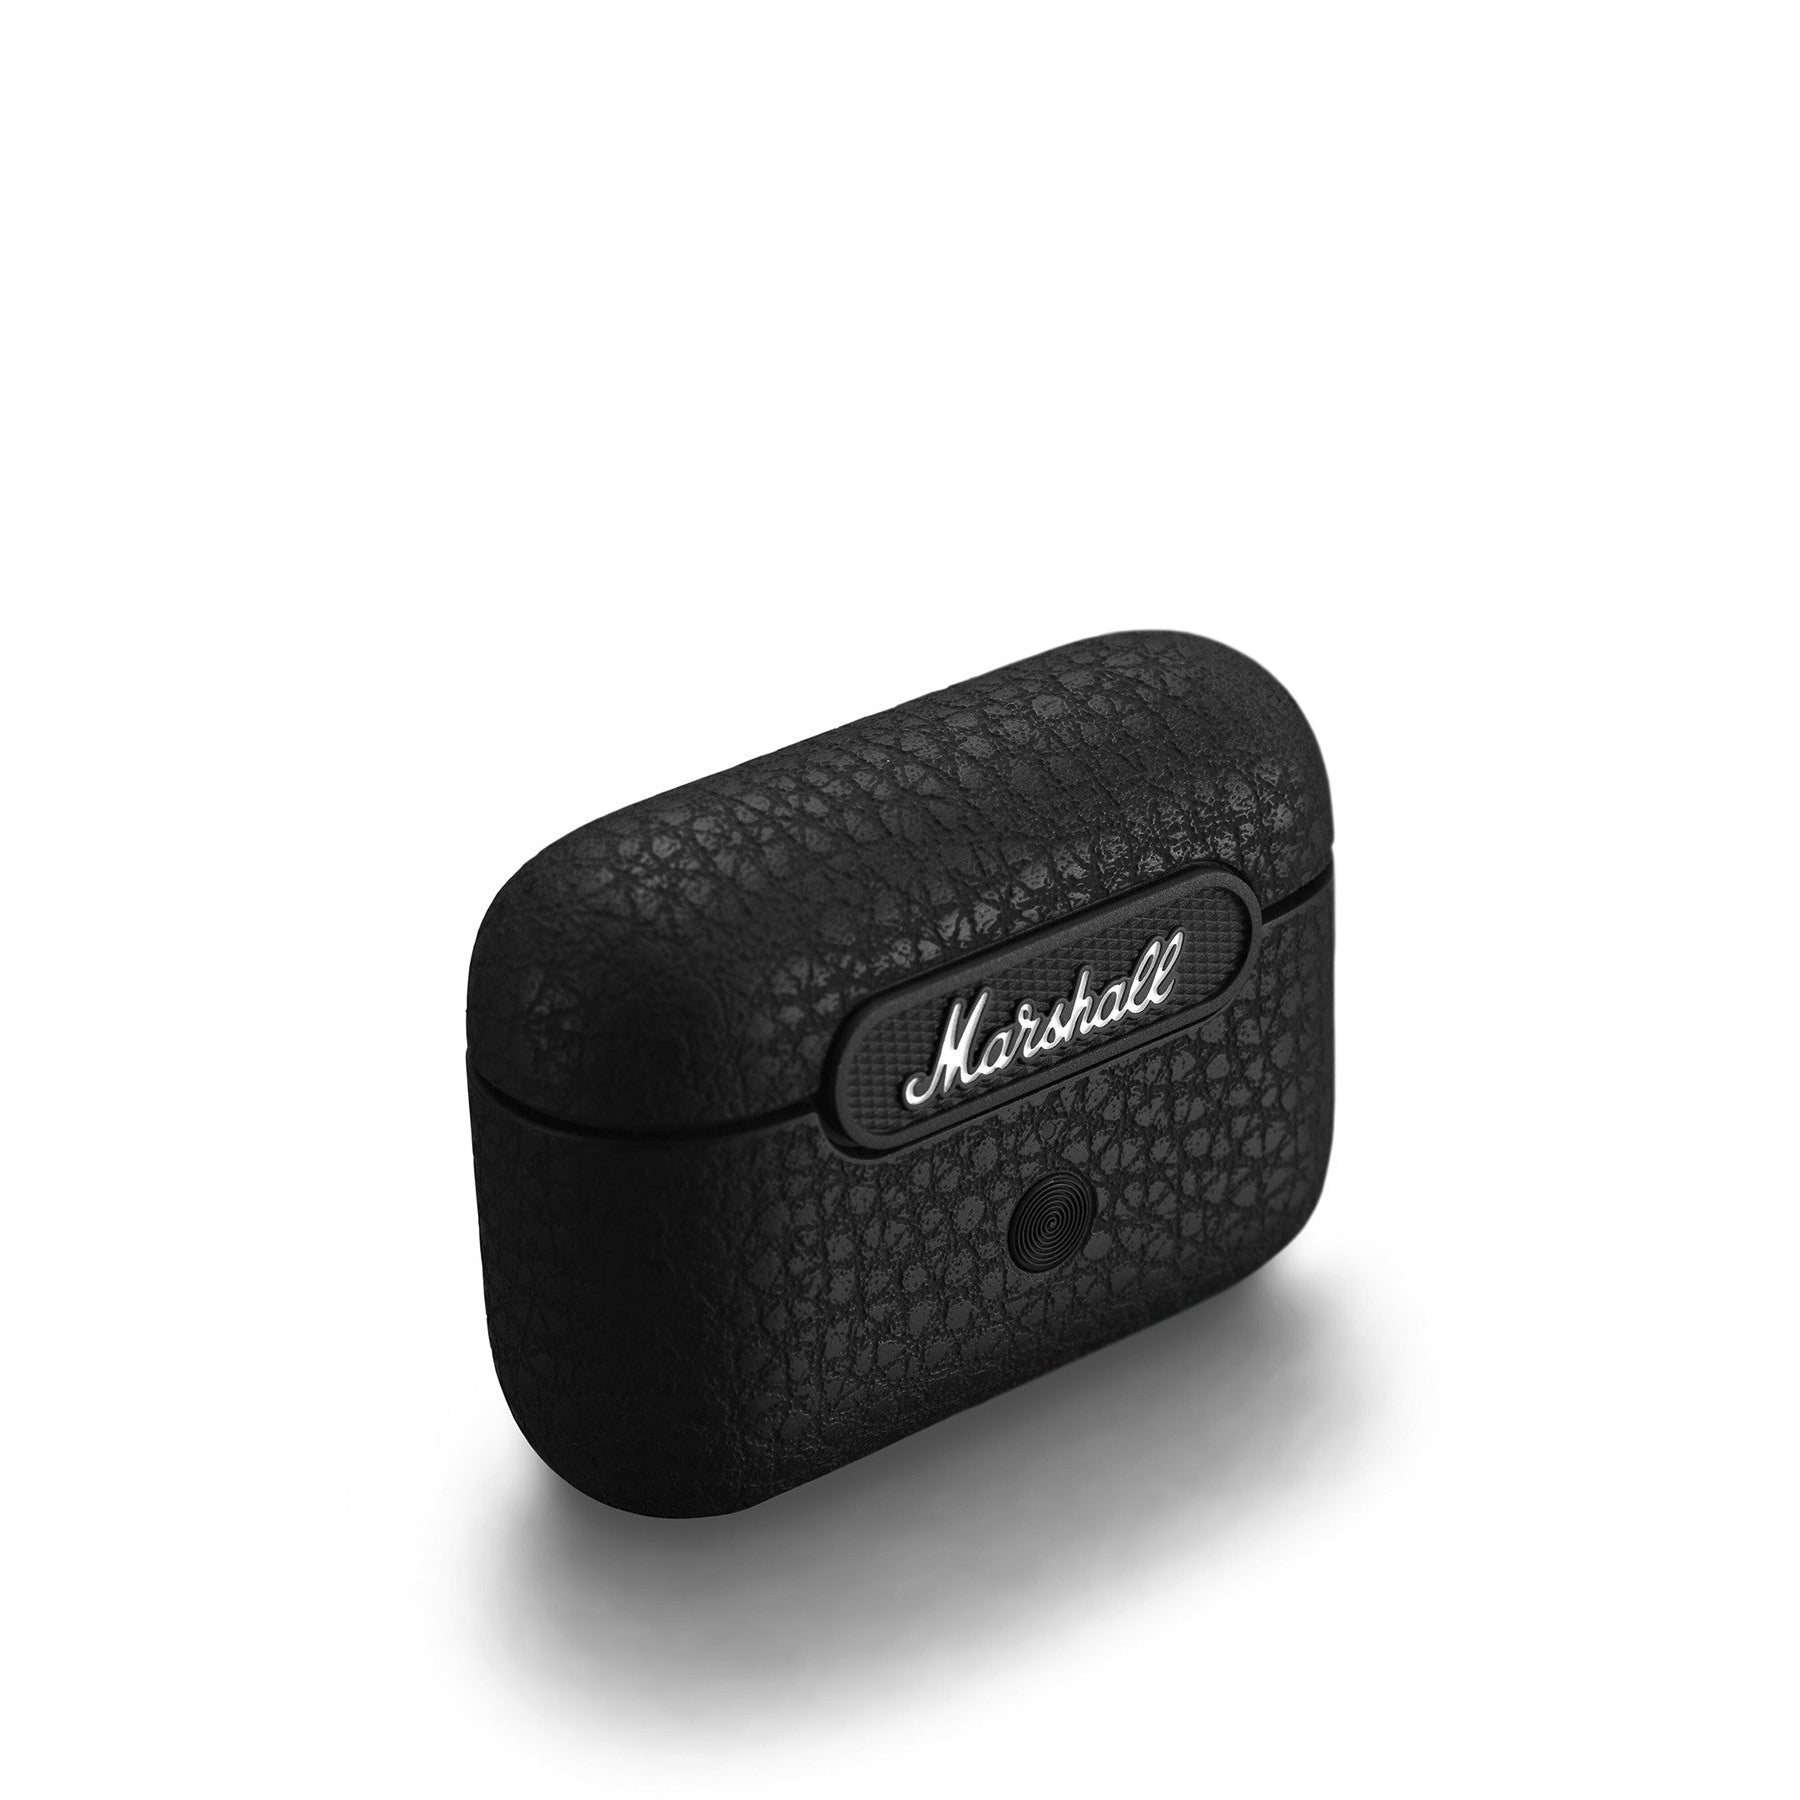 Marshall Motif A.N.C. Wireless Bluetooth Earbuds - Black - MISSING EARBUDS